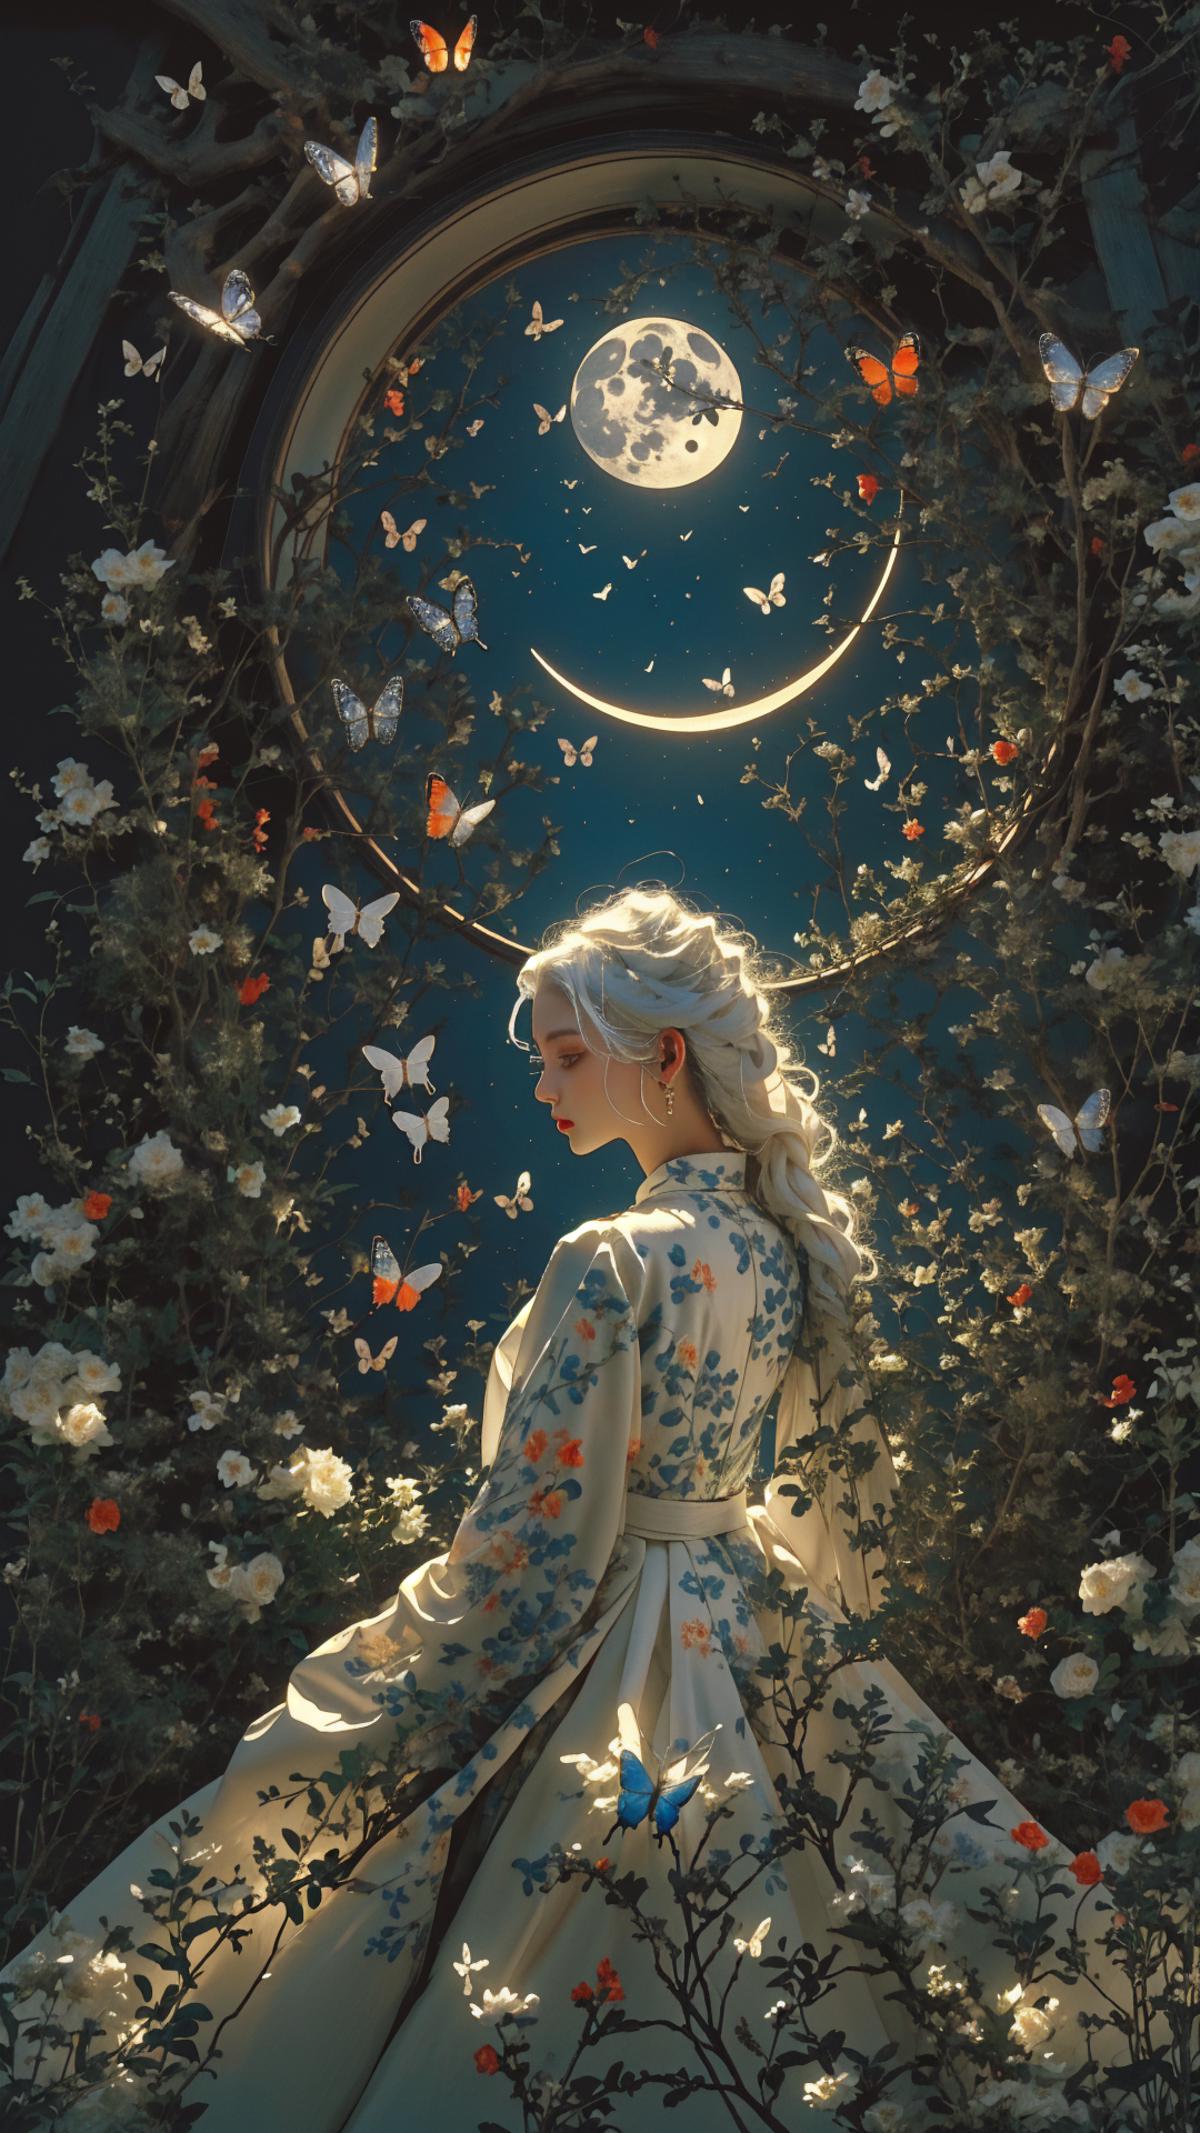 A beautiful woman with blonde hair and a flowery dress is surrounded by butterflies and flowers.